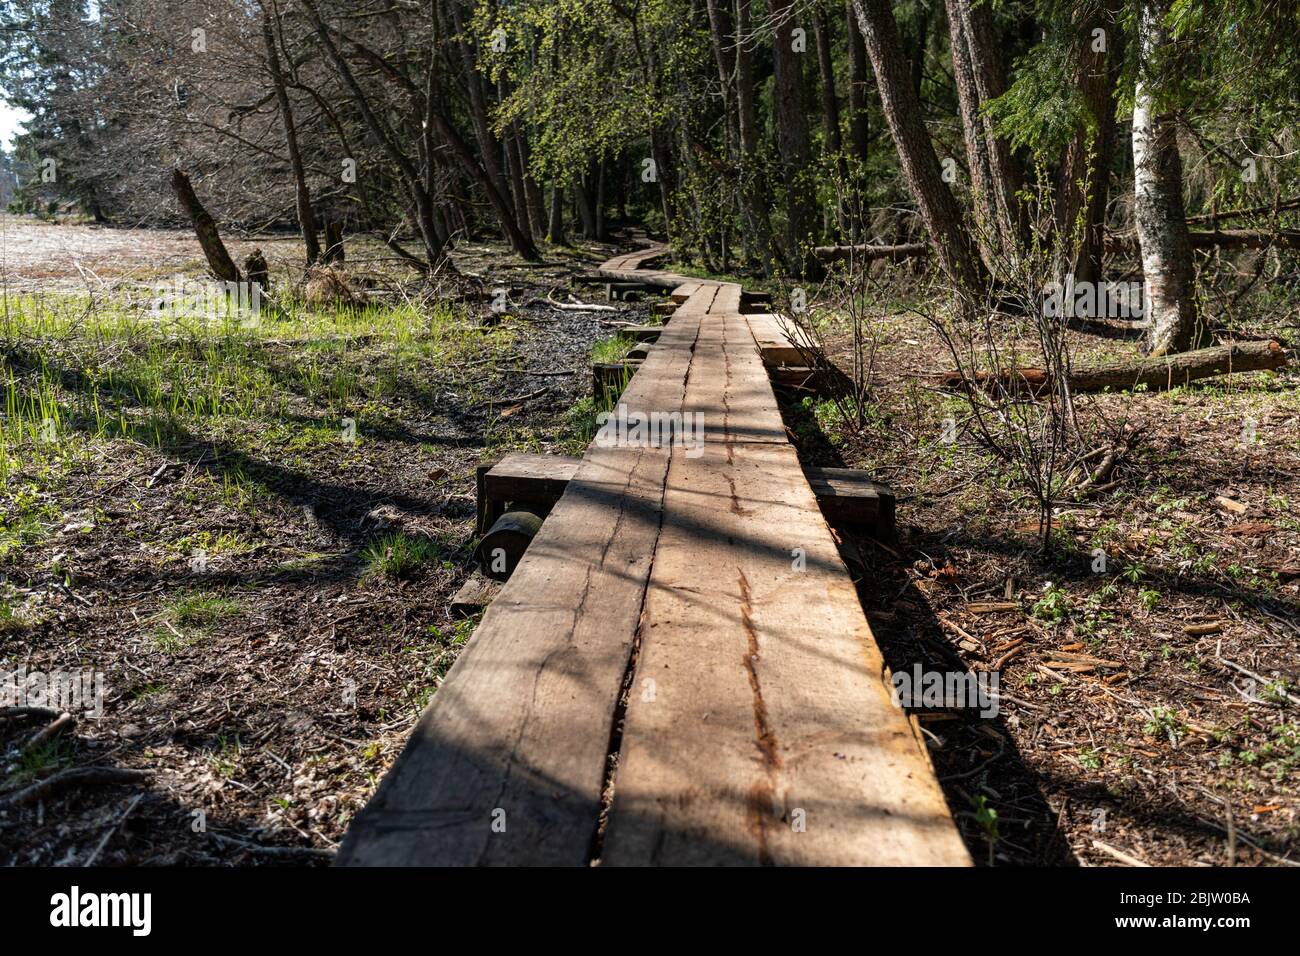 Duckboard or boardwalk or boarded path, part of nature hike trail Stock Photo